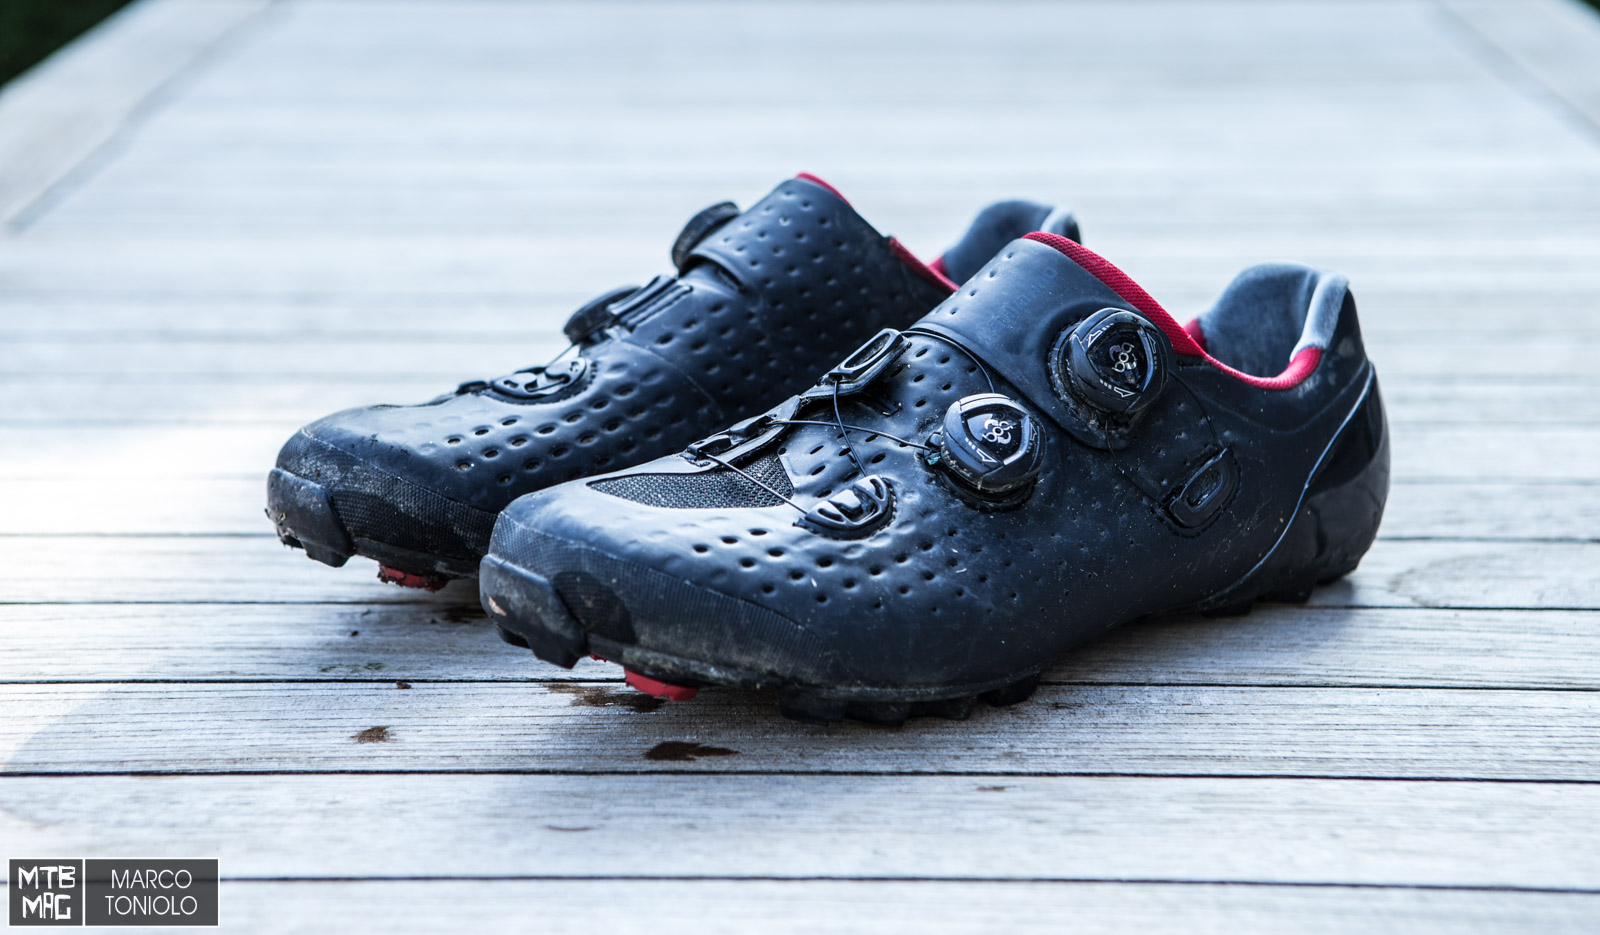 Keuze anker transactie Tested] Shimano S-Phyre XC9 shoes | MTB-MAG.COM